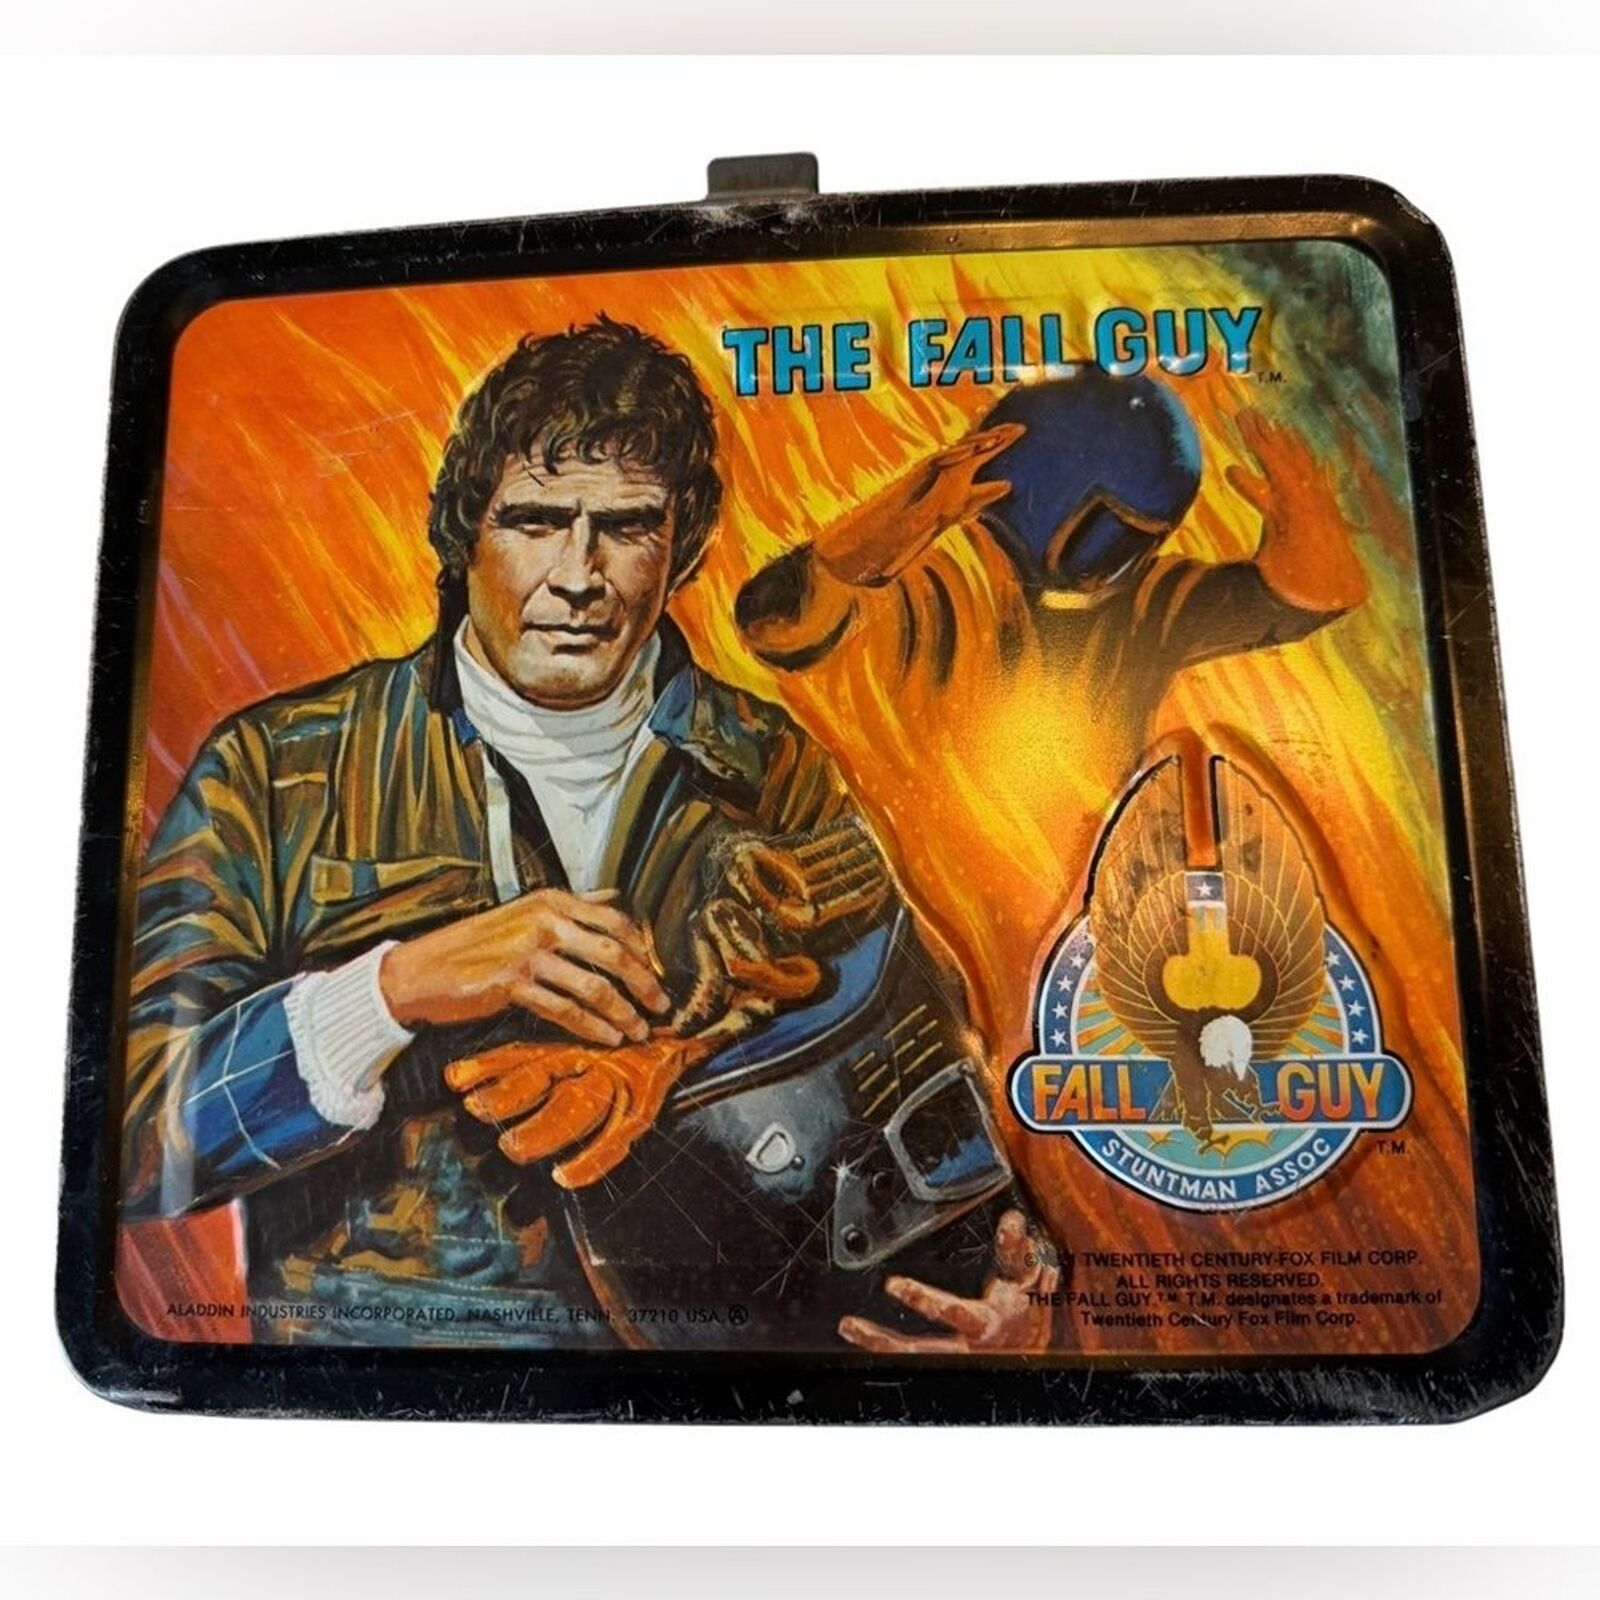 Vintage 1981 The Fall Guy TV Show Metal Lunchbox Rare